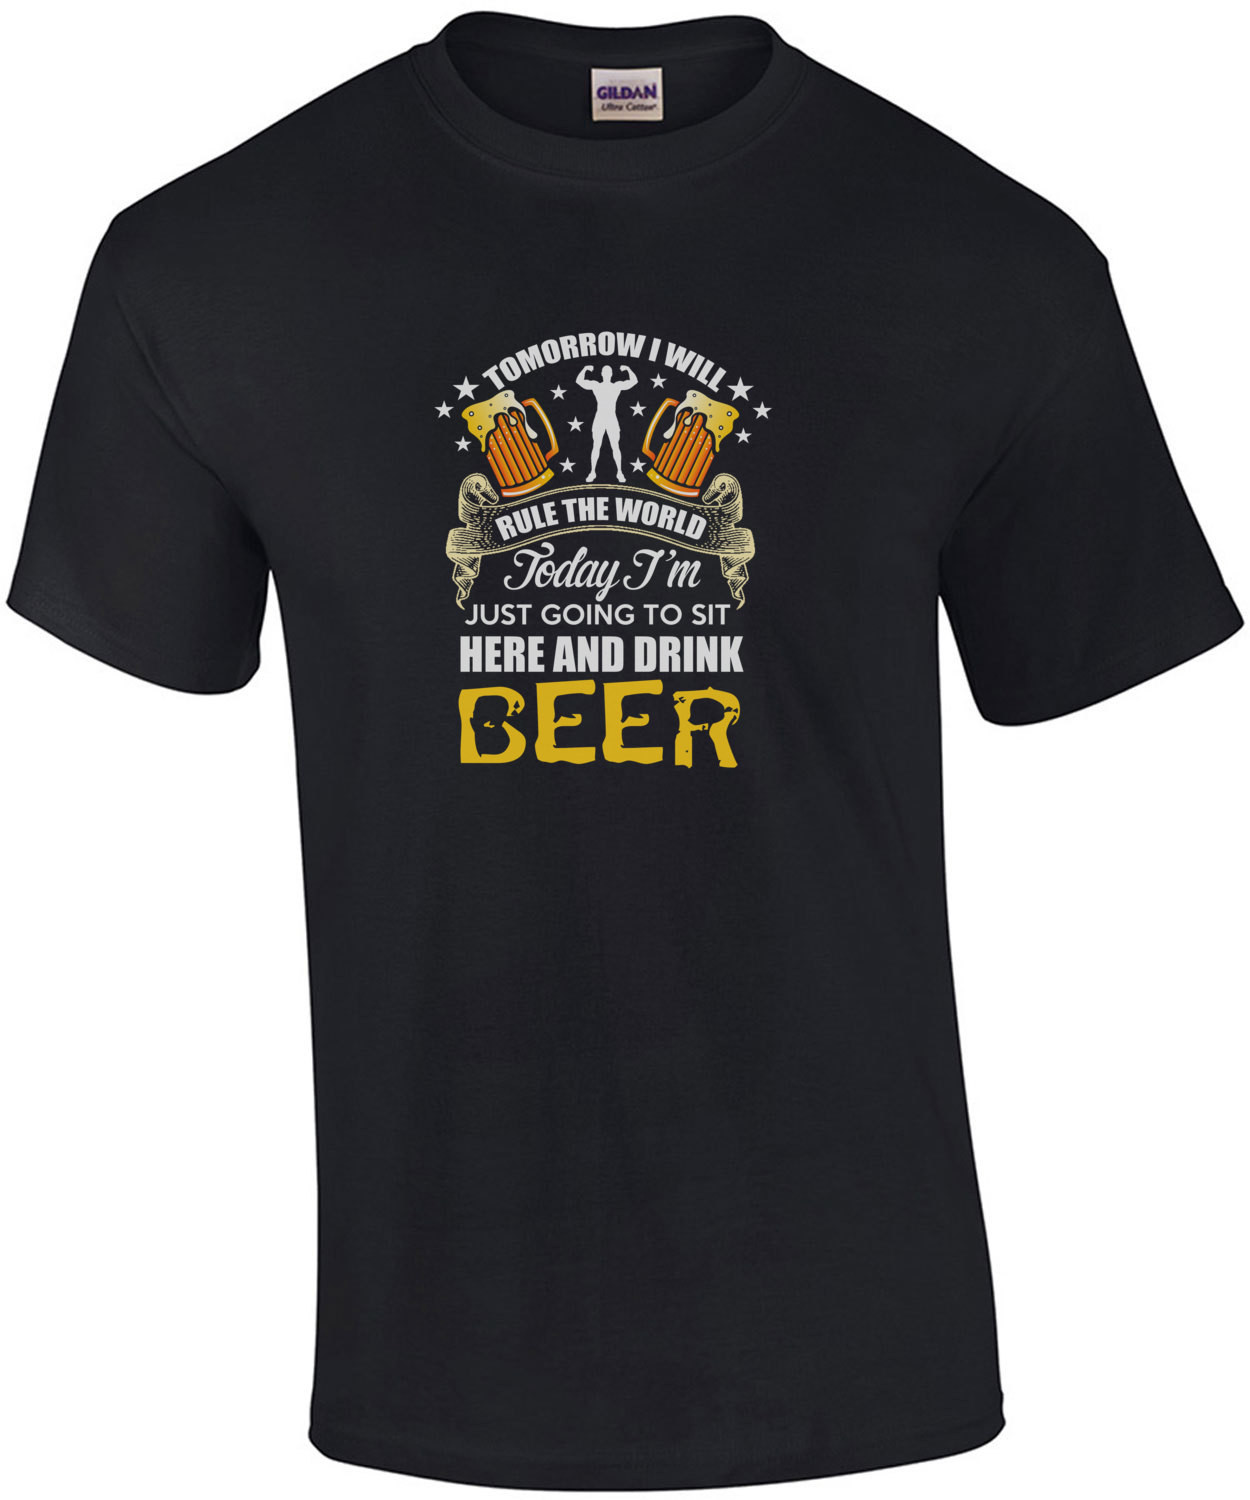 Tomorrow I Will Rule The World Today I'm Just Going To Sit Here And Drink Beer T-Shirt